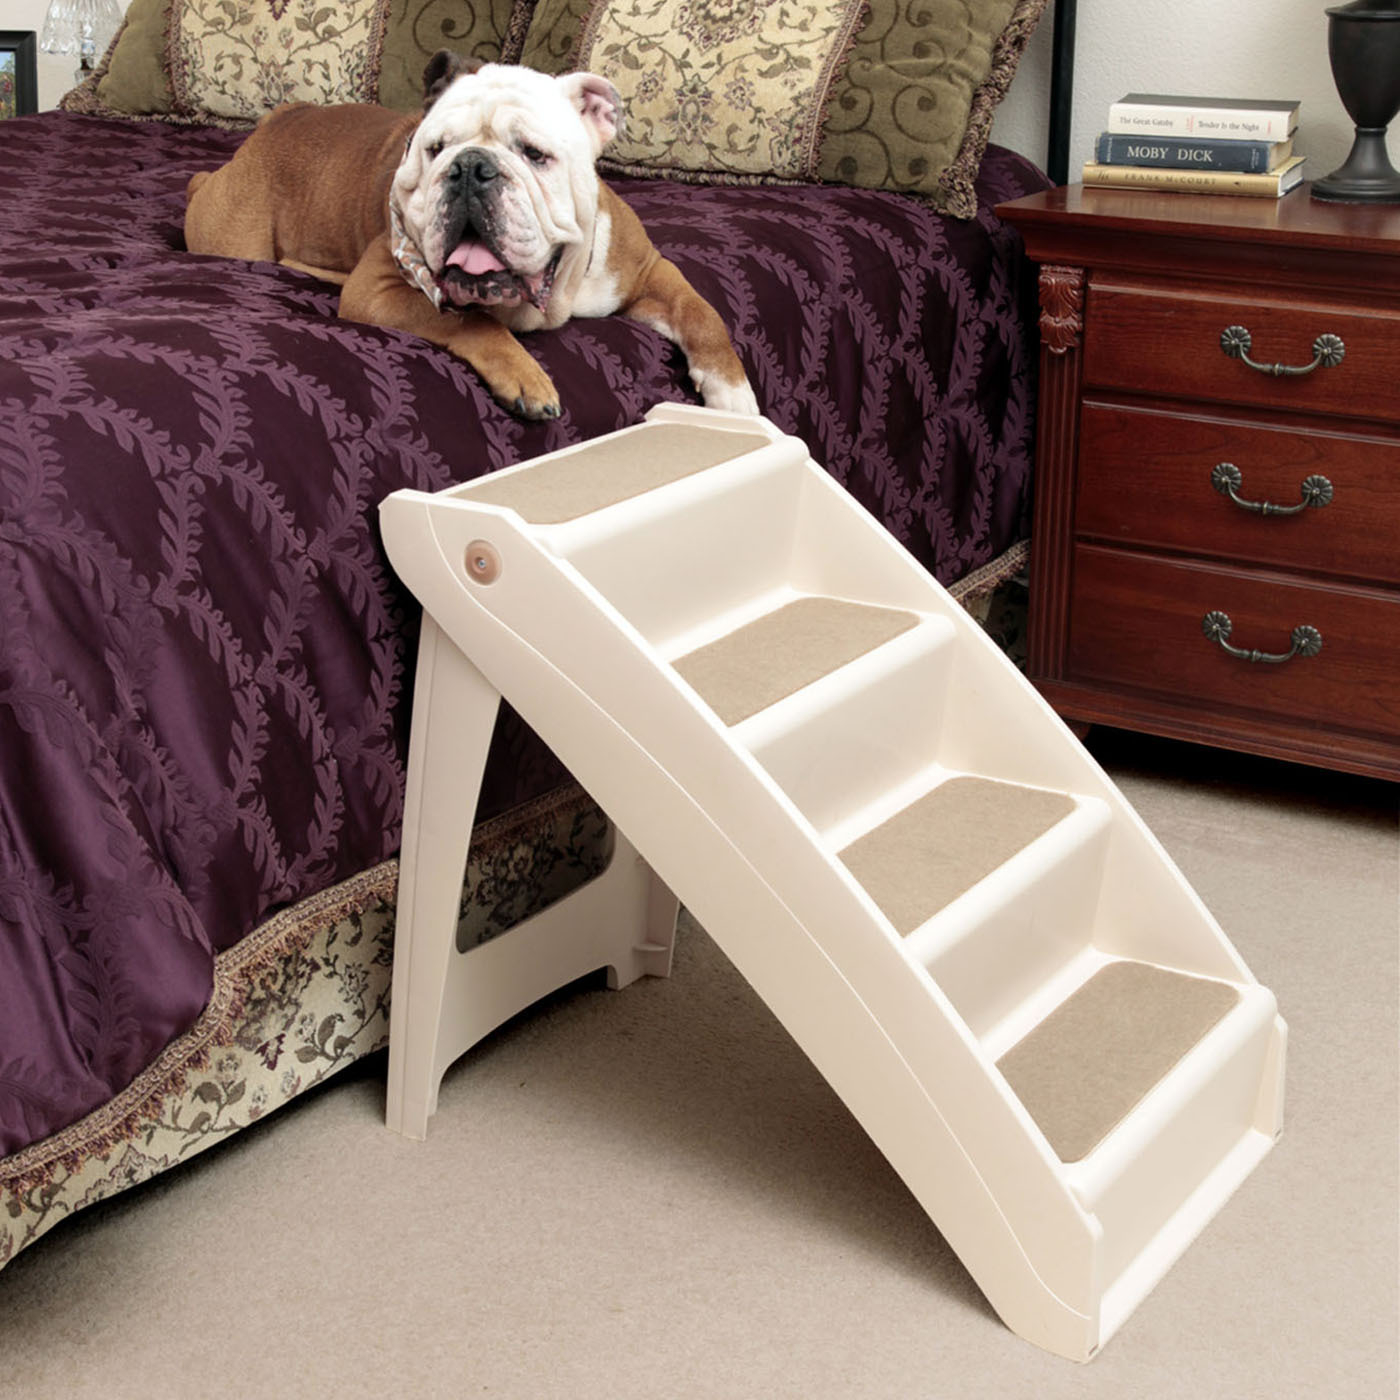 4 Steps Dog Stairs for High Beds Stairs for Pet to Get On Bed for Small and Mid Dogs Cats and Pets Dog Stairs for Small Dogs 